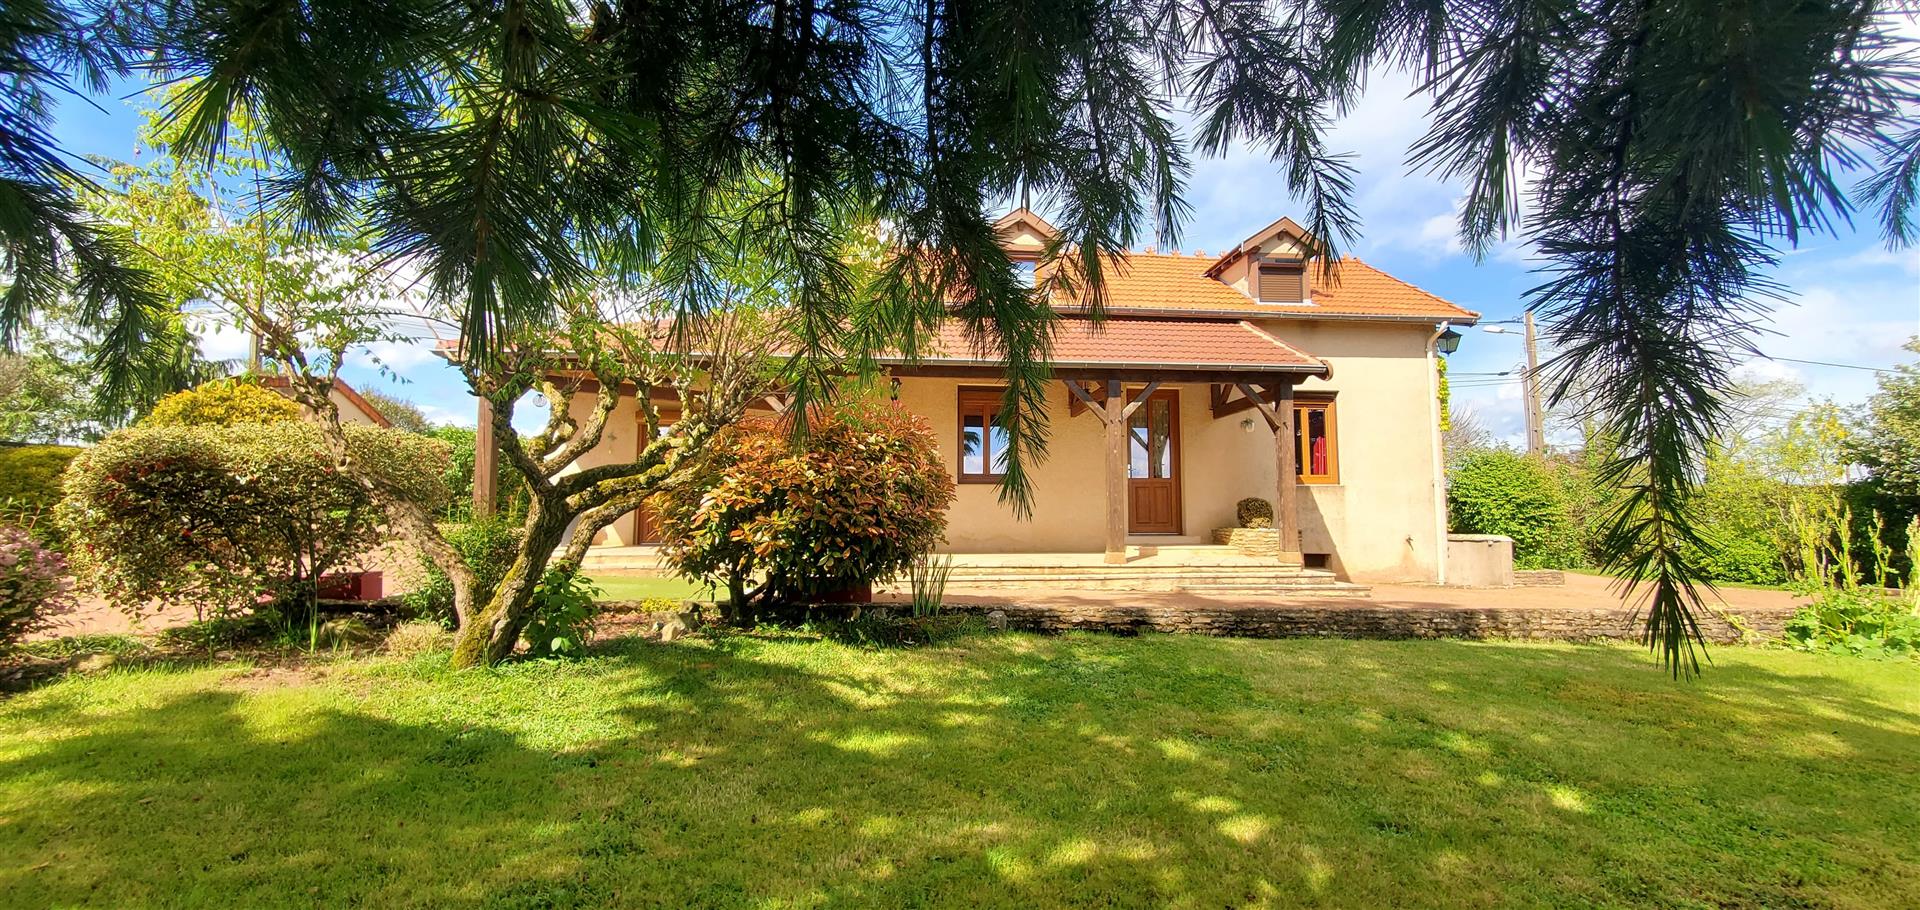 Old house with beautiful garden 20 minutes from Cluny and 15 minutes from Charolles